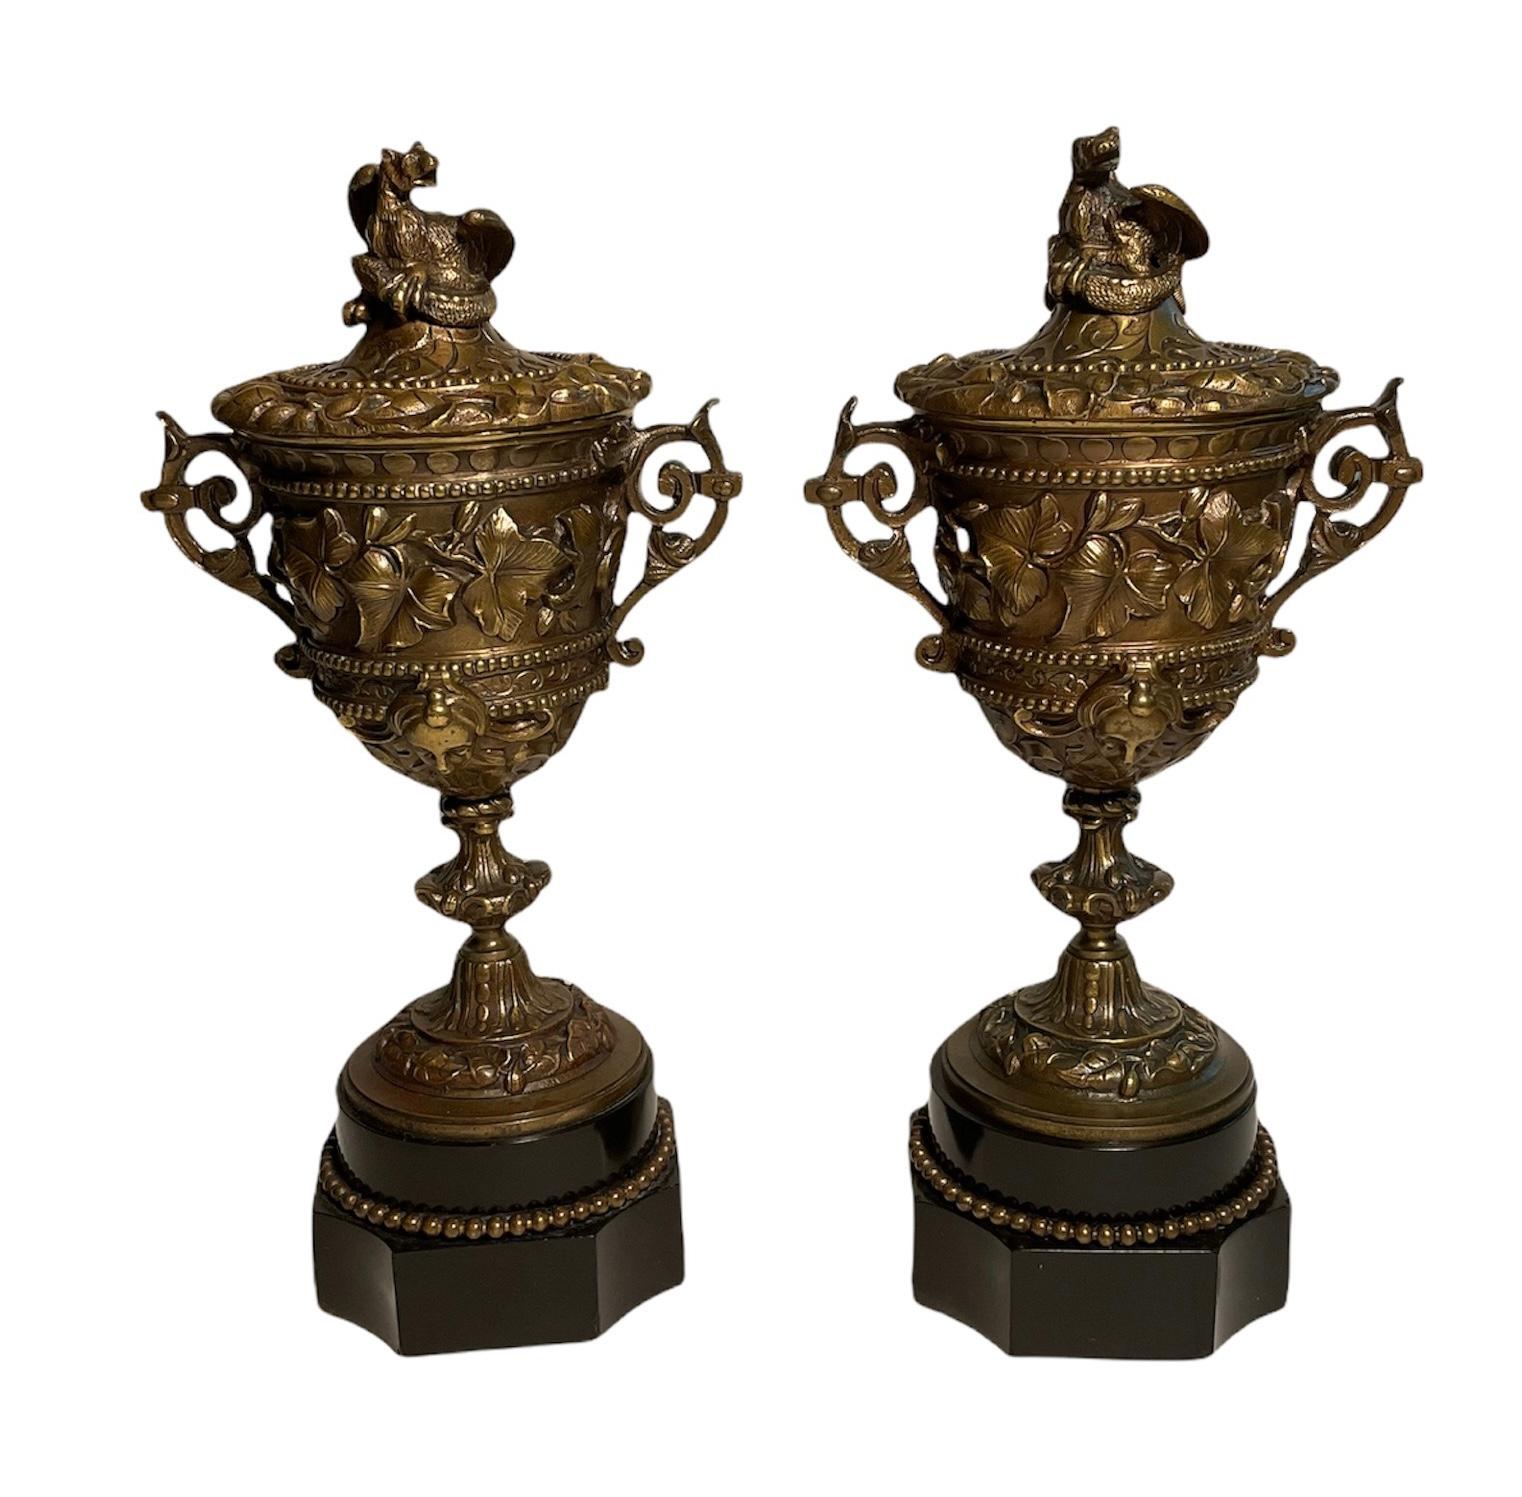 This is a pair of patinated bronze cups with covers. A repousse of ivy leaves garland decorates the center of the cups’ body. Above and below it, there are a chain of beads adorning it. Below them, there is a repousse of a head-face of a woman in